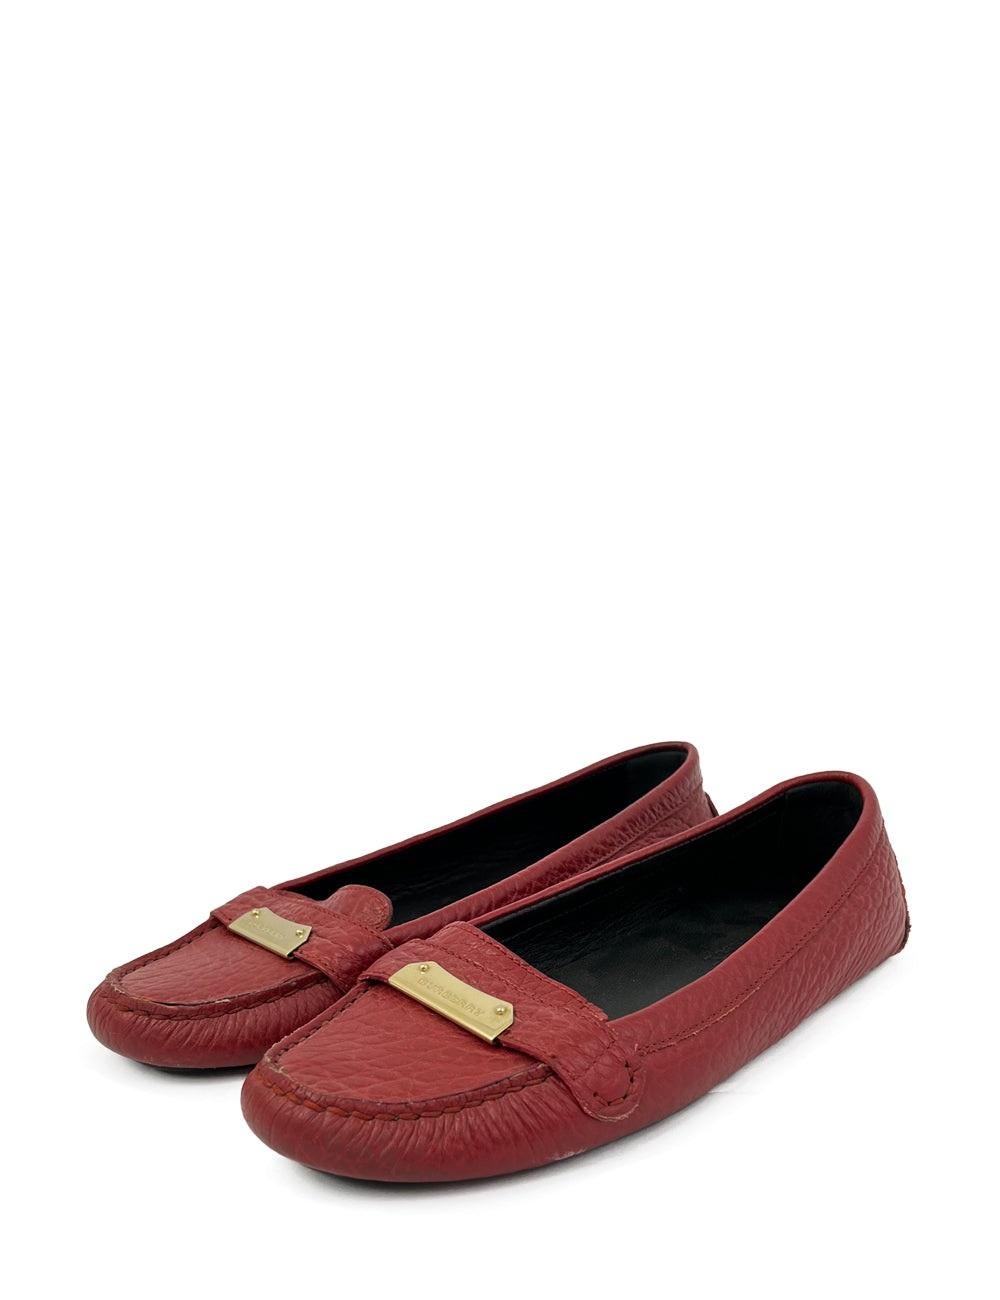 Burberry EU 38 Red Leather Loafers In Good Condition For Sale In Amman, JO